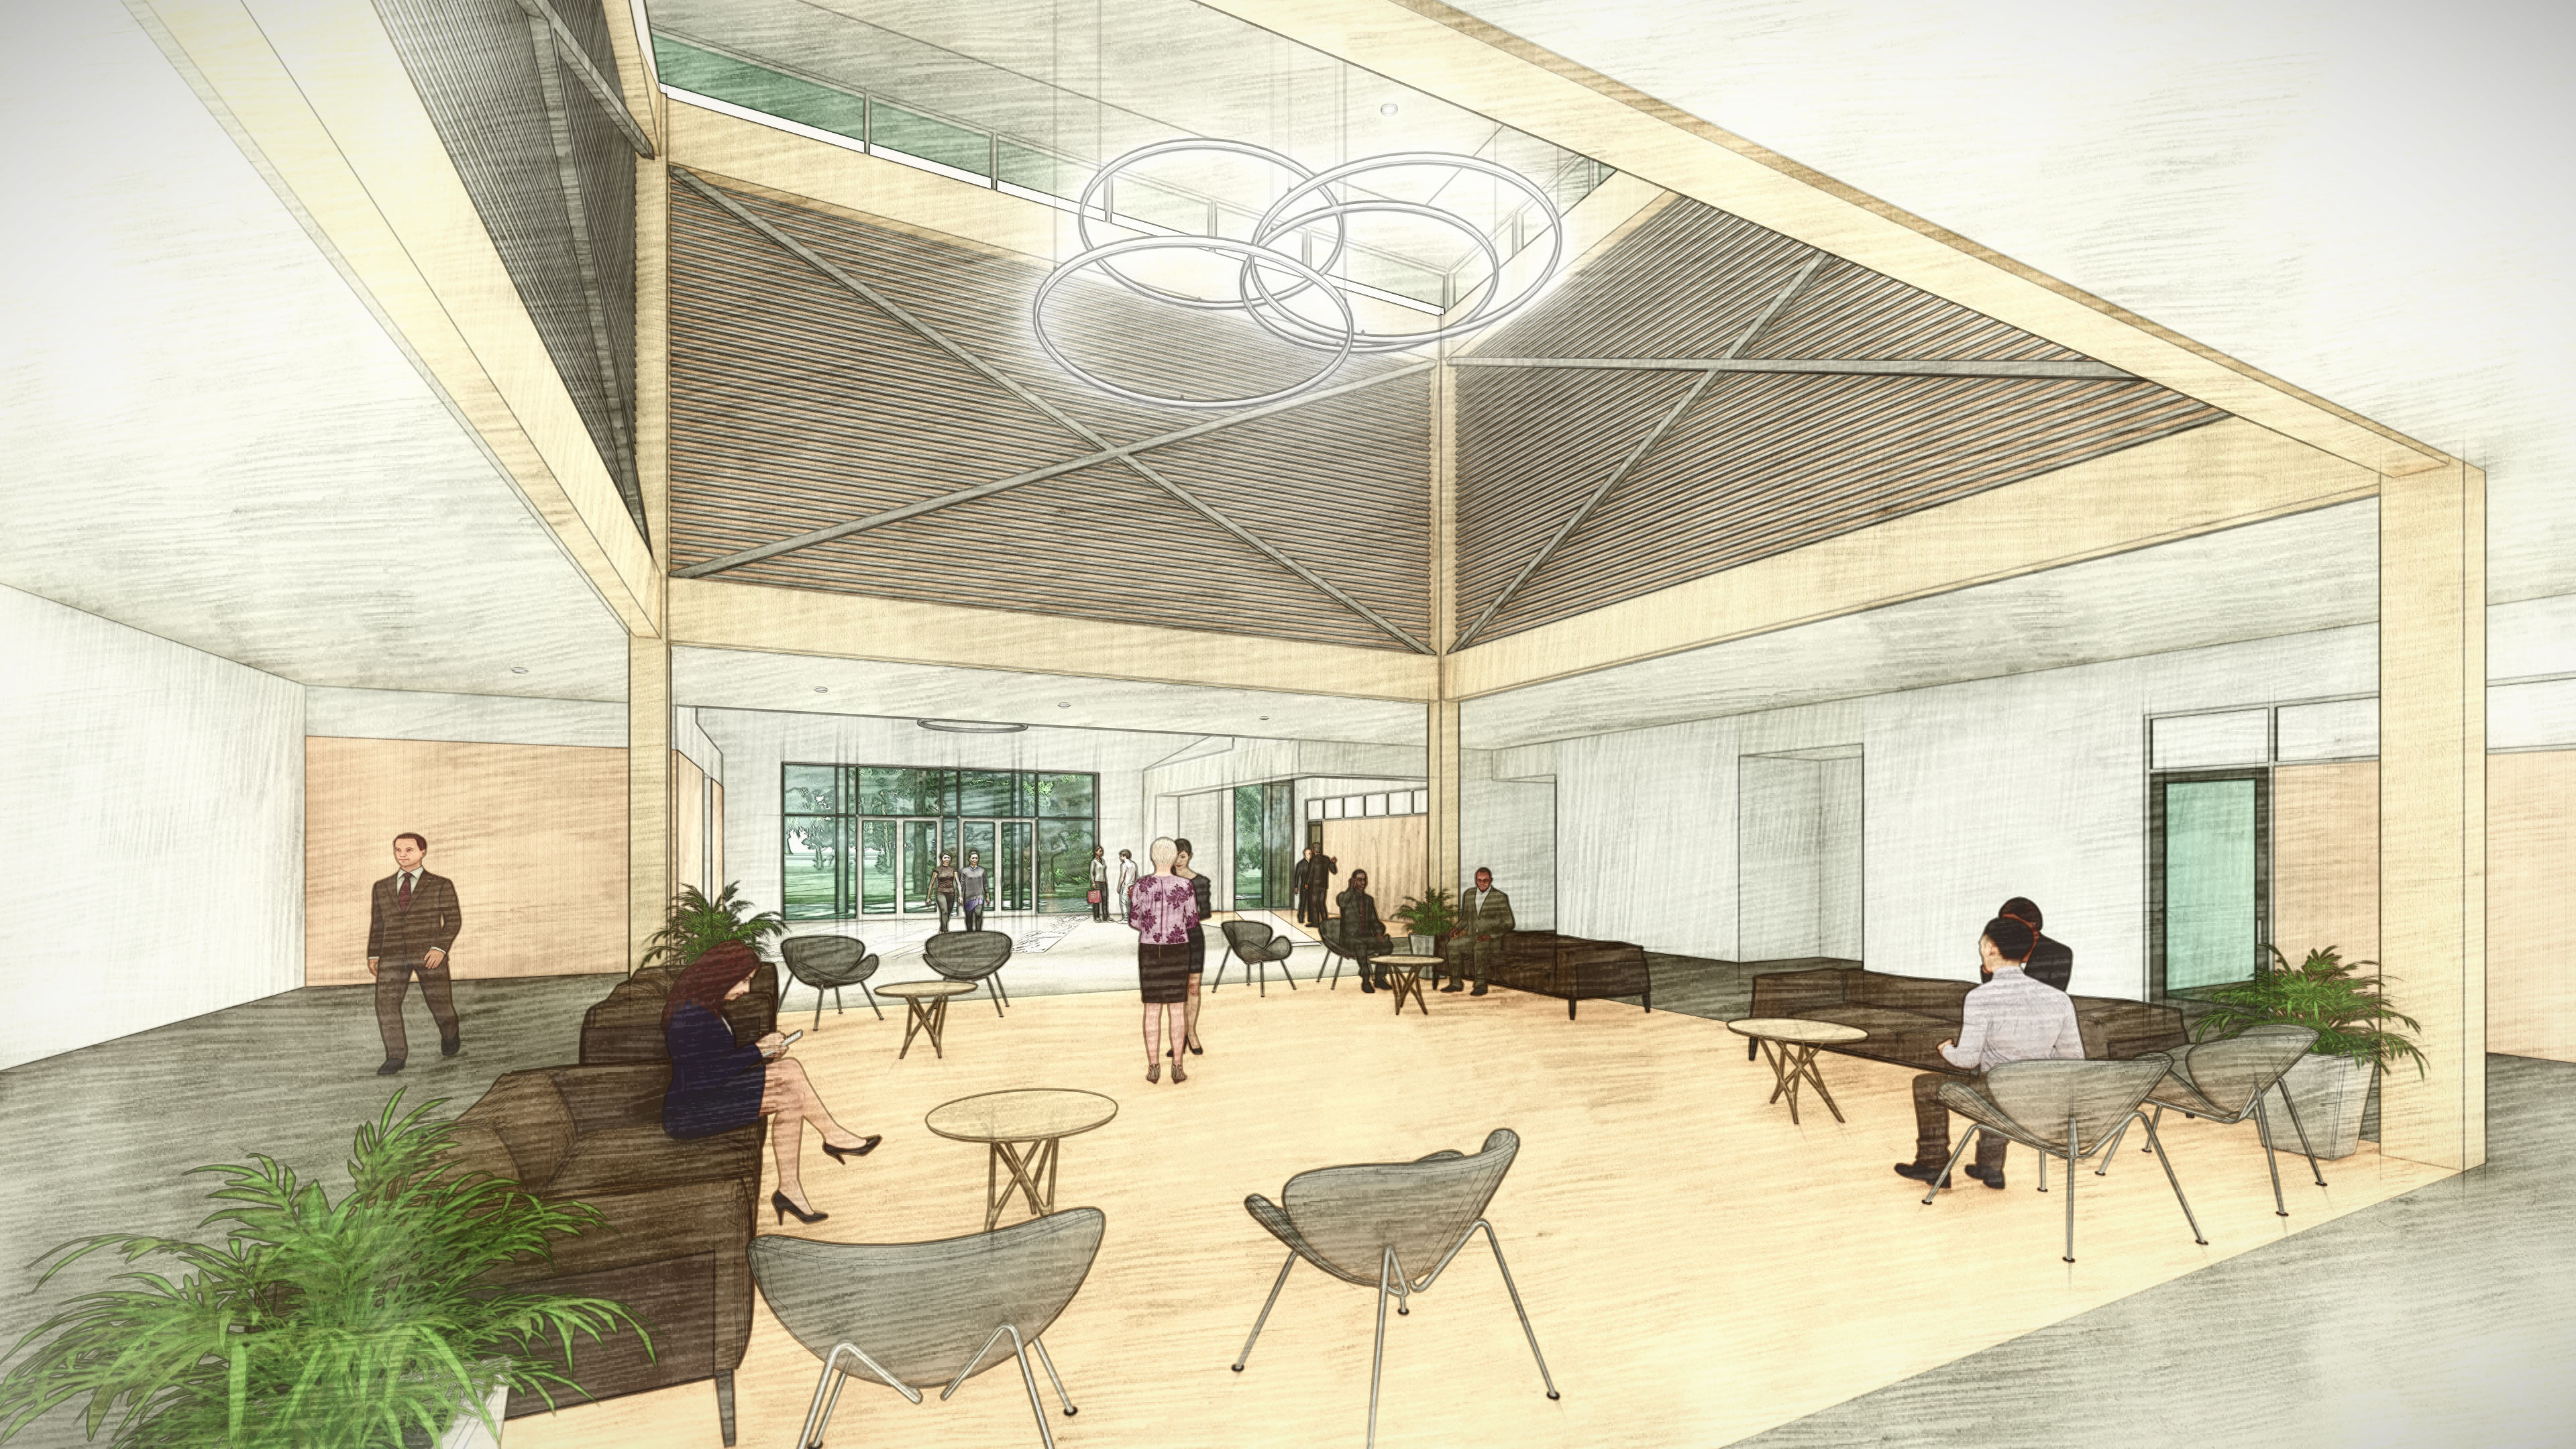 Francis Marion University - Honors Learning Center - Primary Atrium Interior Concept Rendering